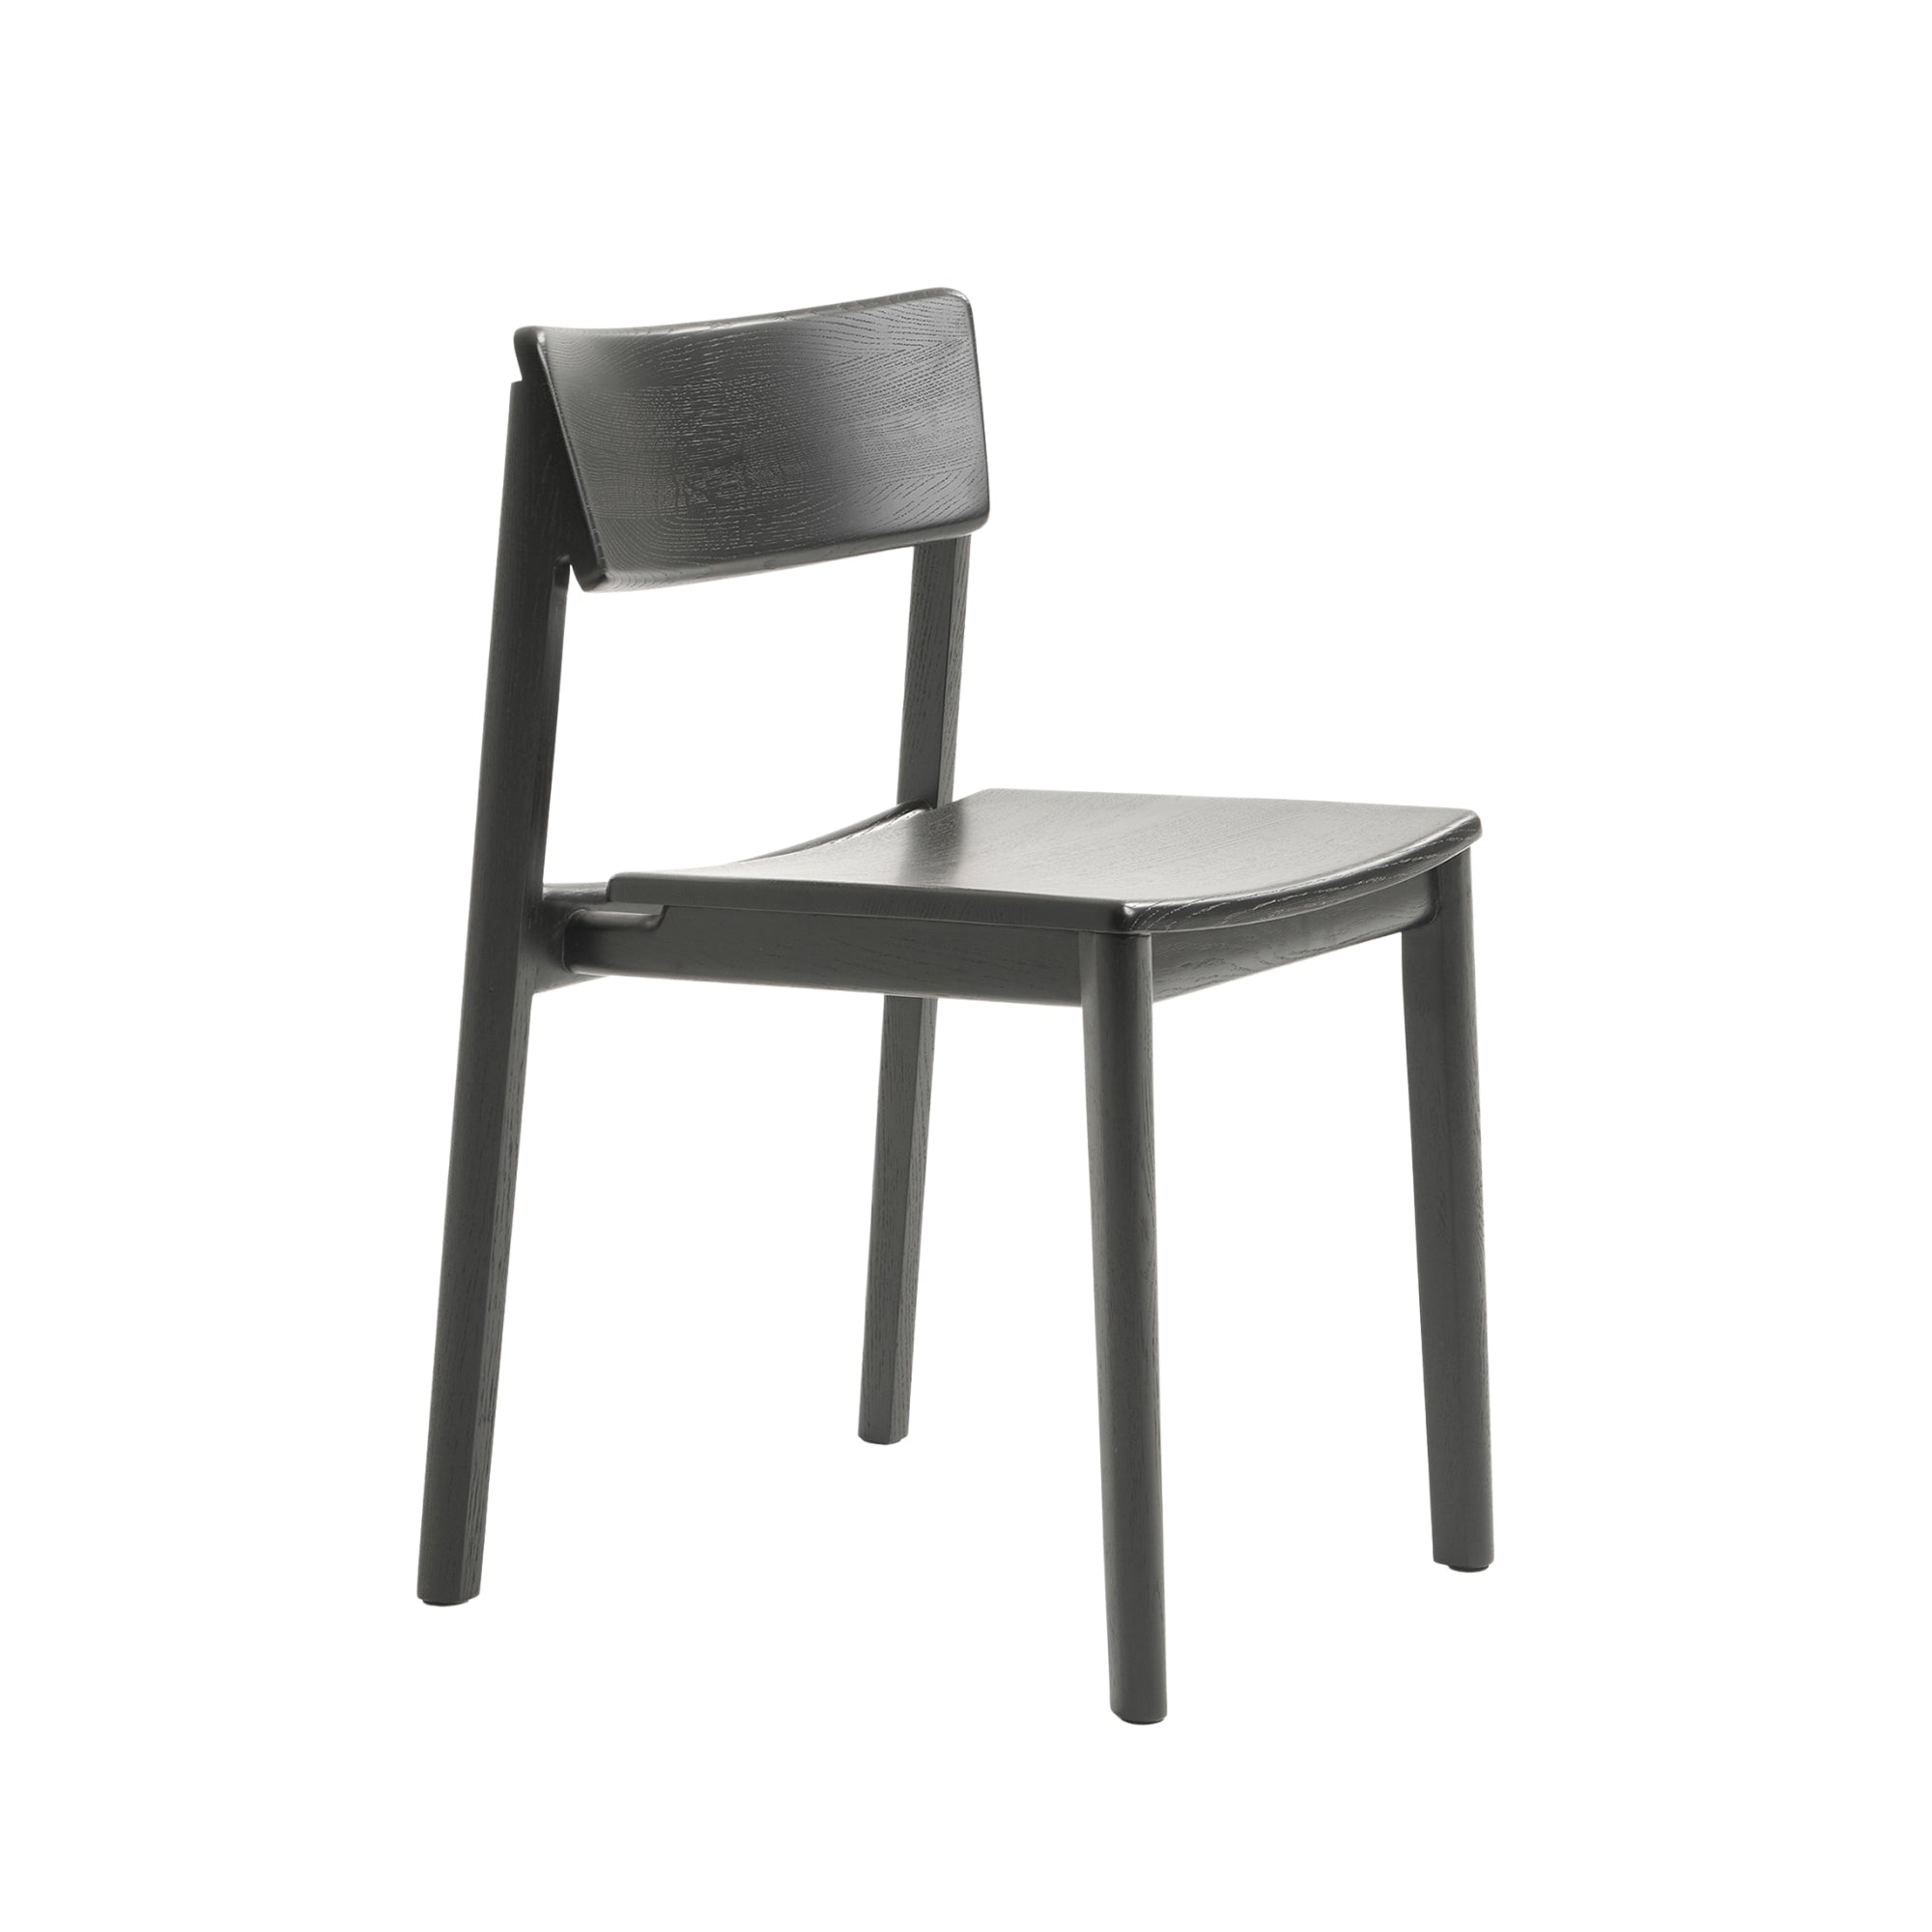 TORRE CHAIR